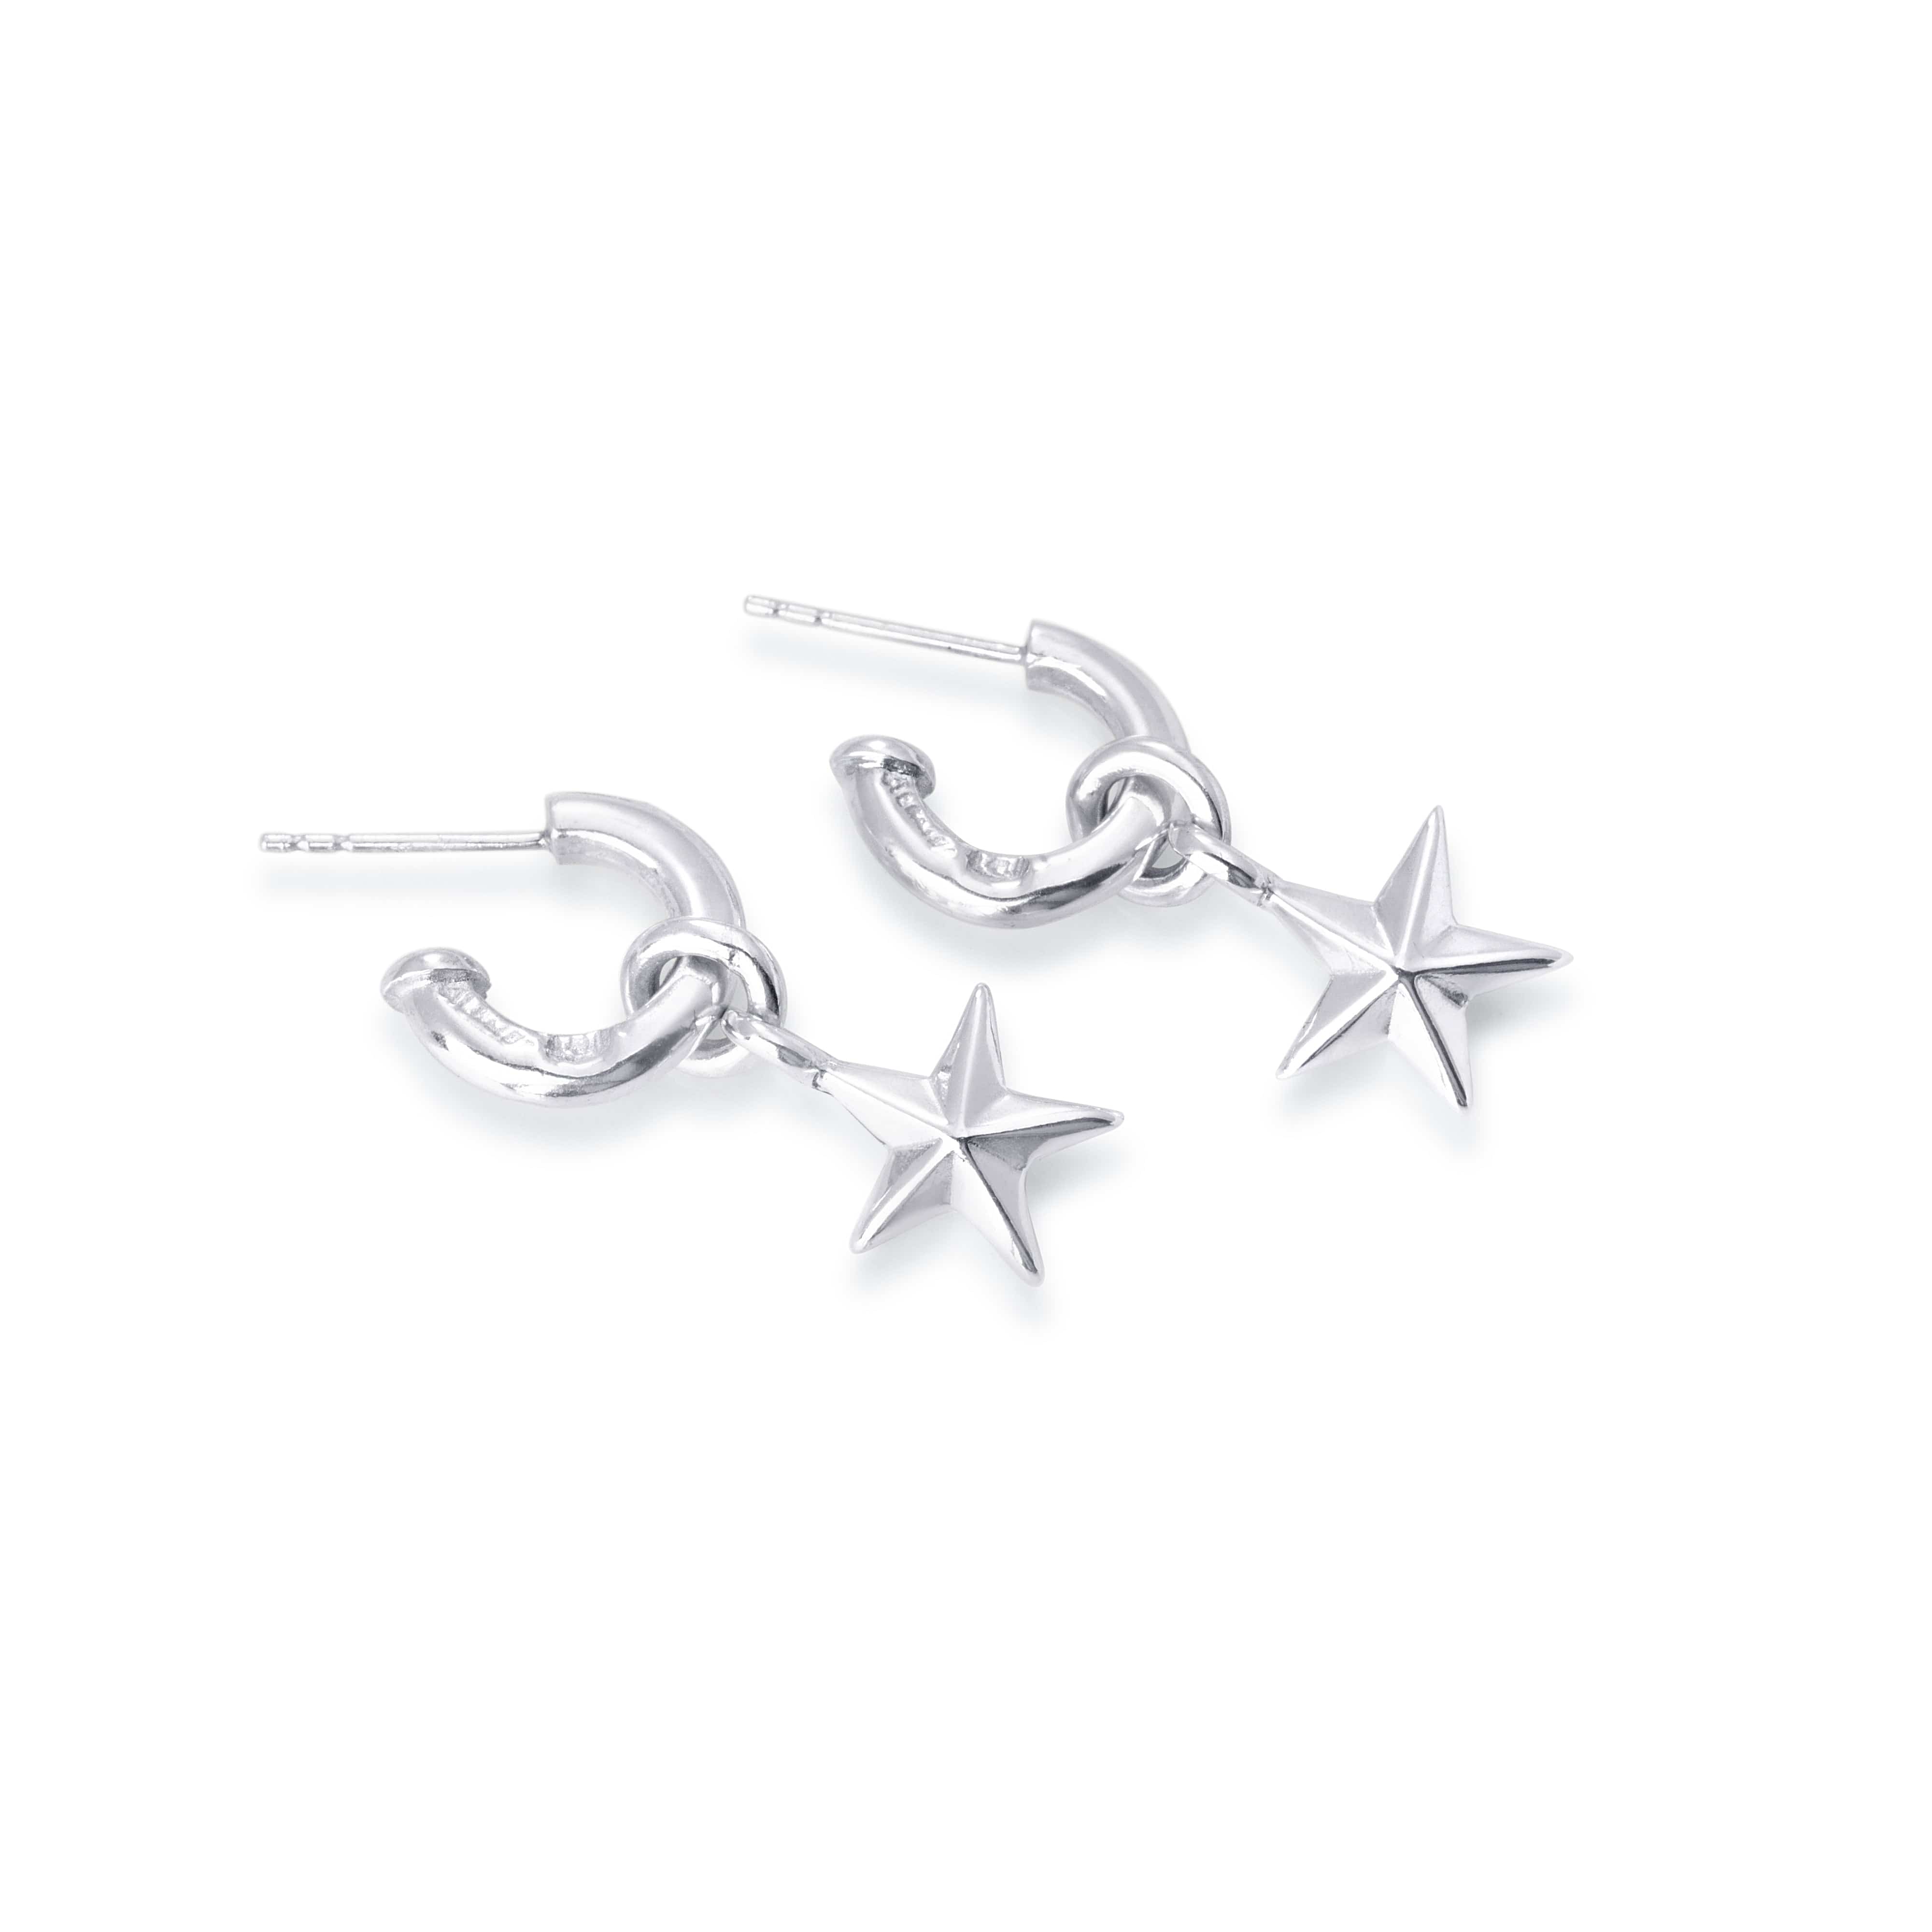 Solid sterling silver hoop stud with hanging star charm.